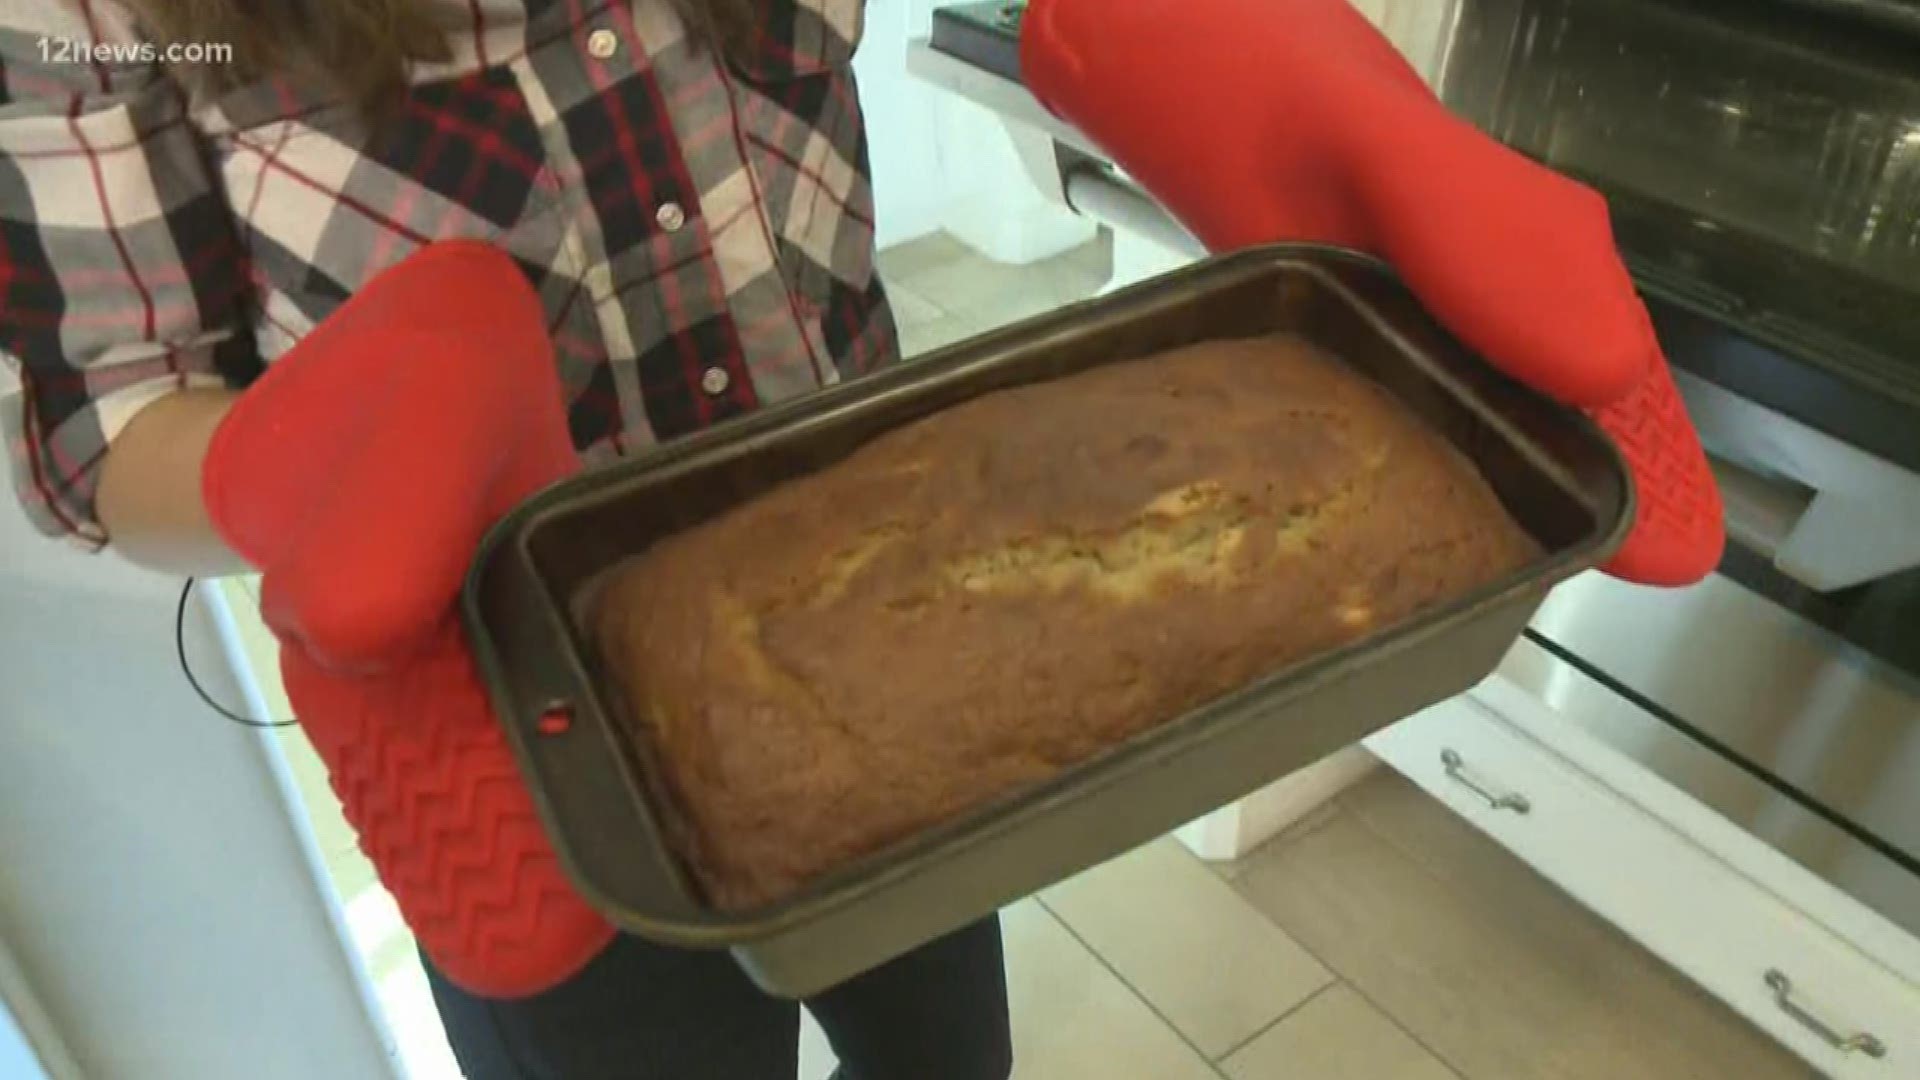 Tram Mai shares her delicious banana bread recipe. Give it a try!